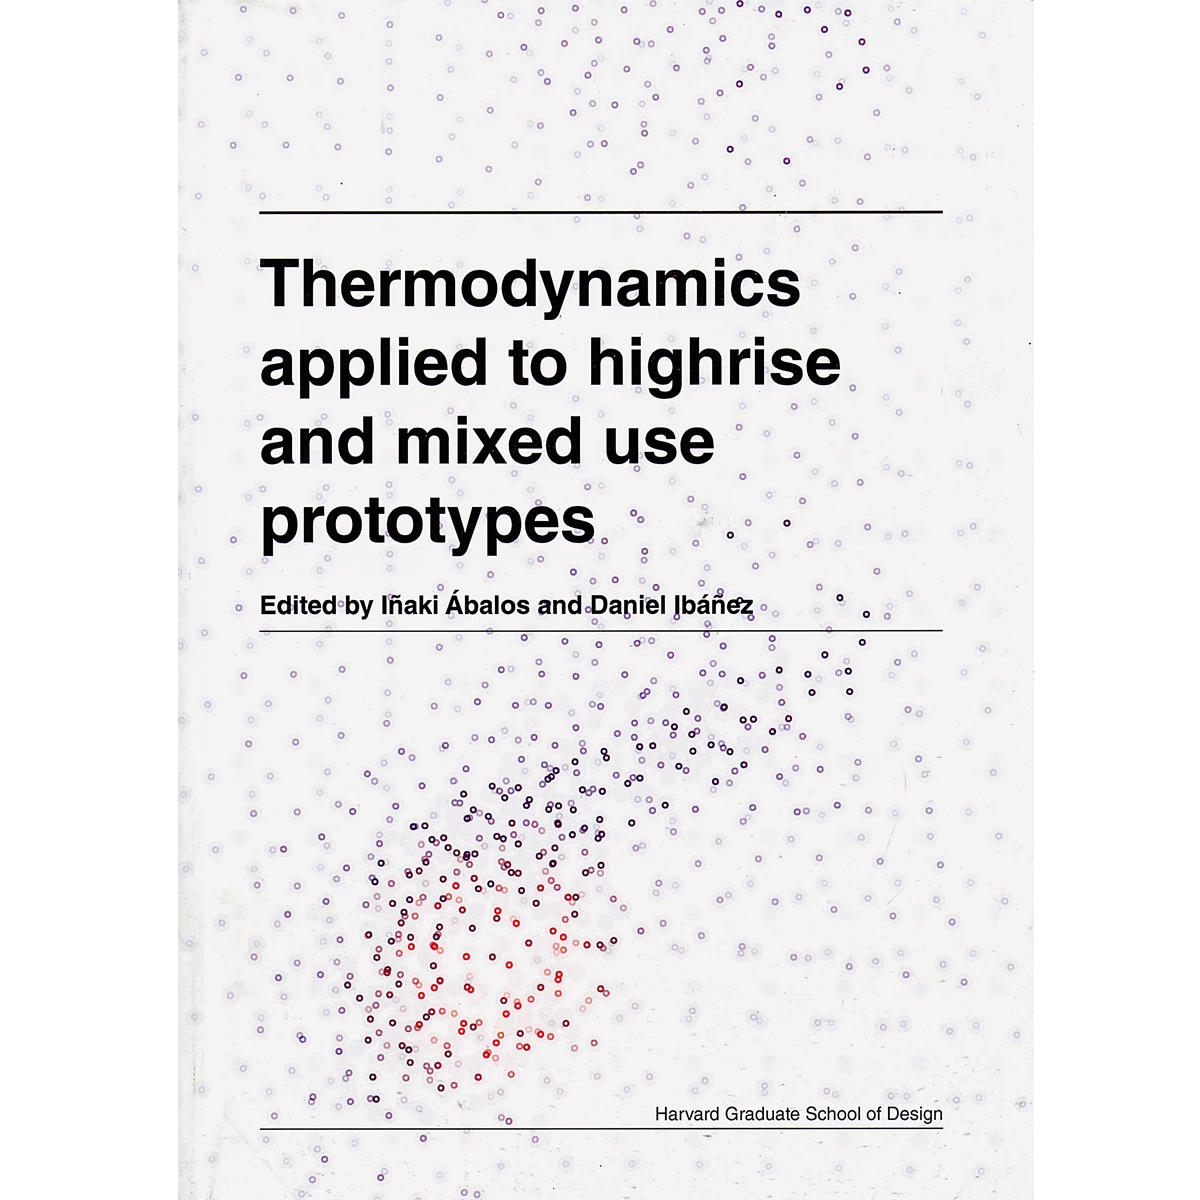 Thermodynamics applied to highrise and mixed use prototyped